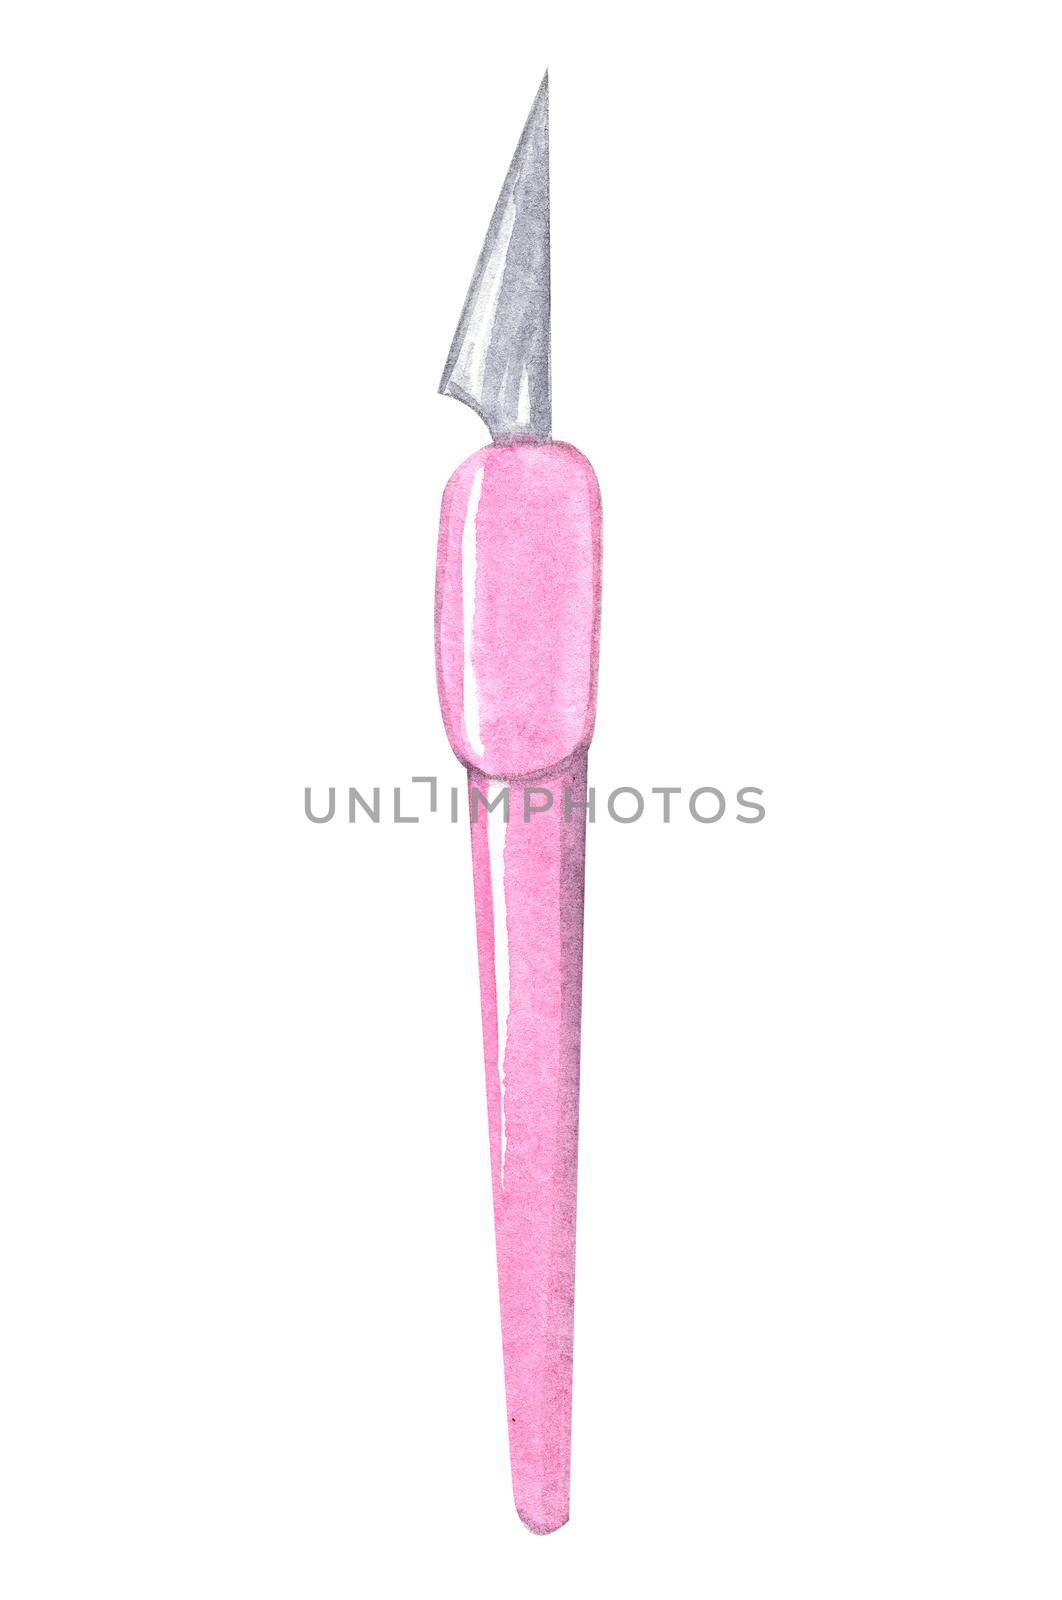 Watercolor pink scalpel tool for clay work isolated on white by dreamloud